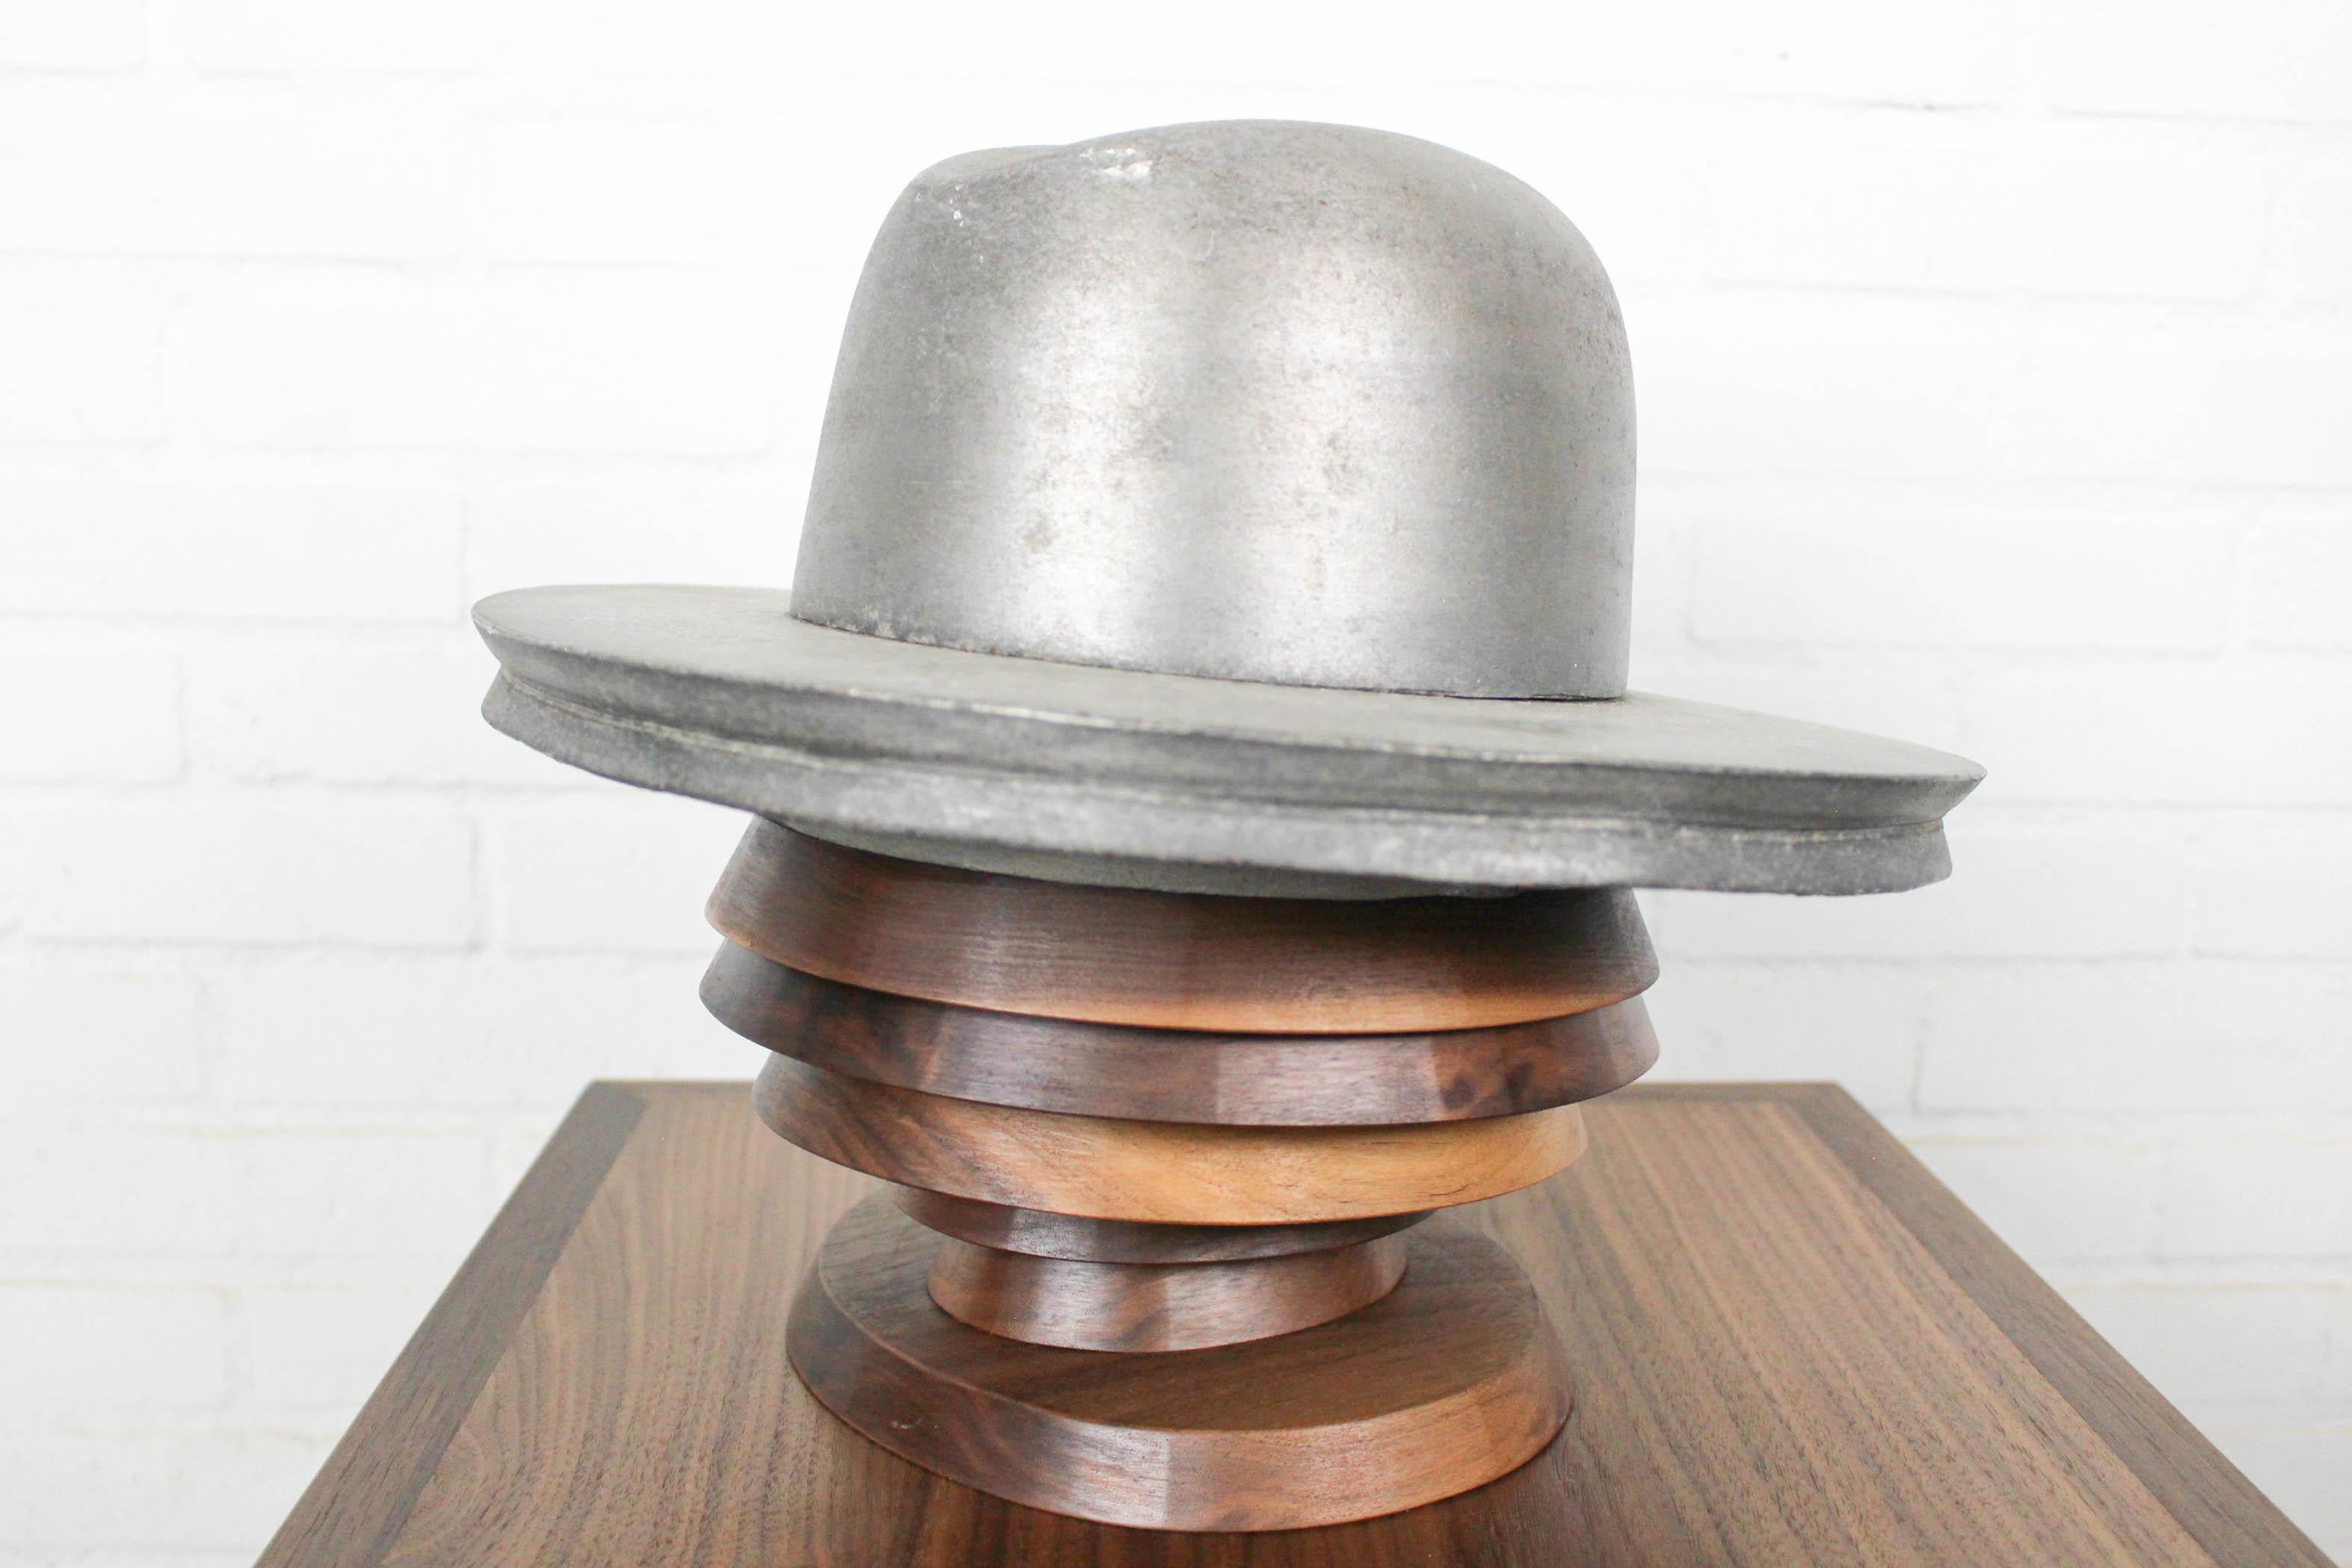 Mid-Century Modern Vintage Aluminum Hat Block Mold Form, circa Mid-20th Century with American Nut S For Sale